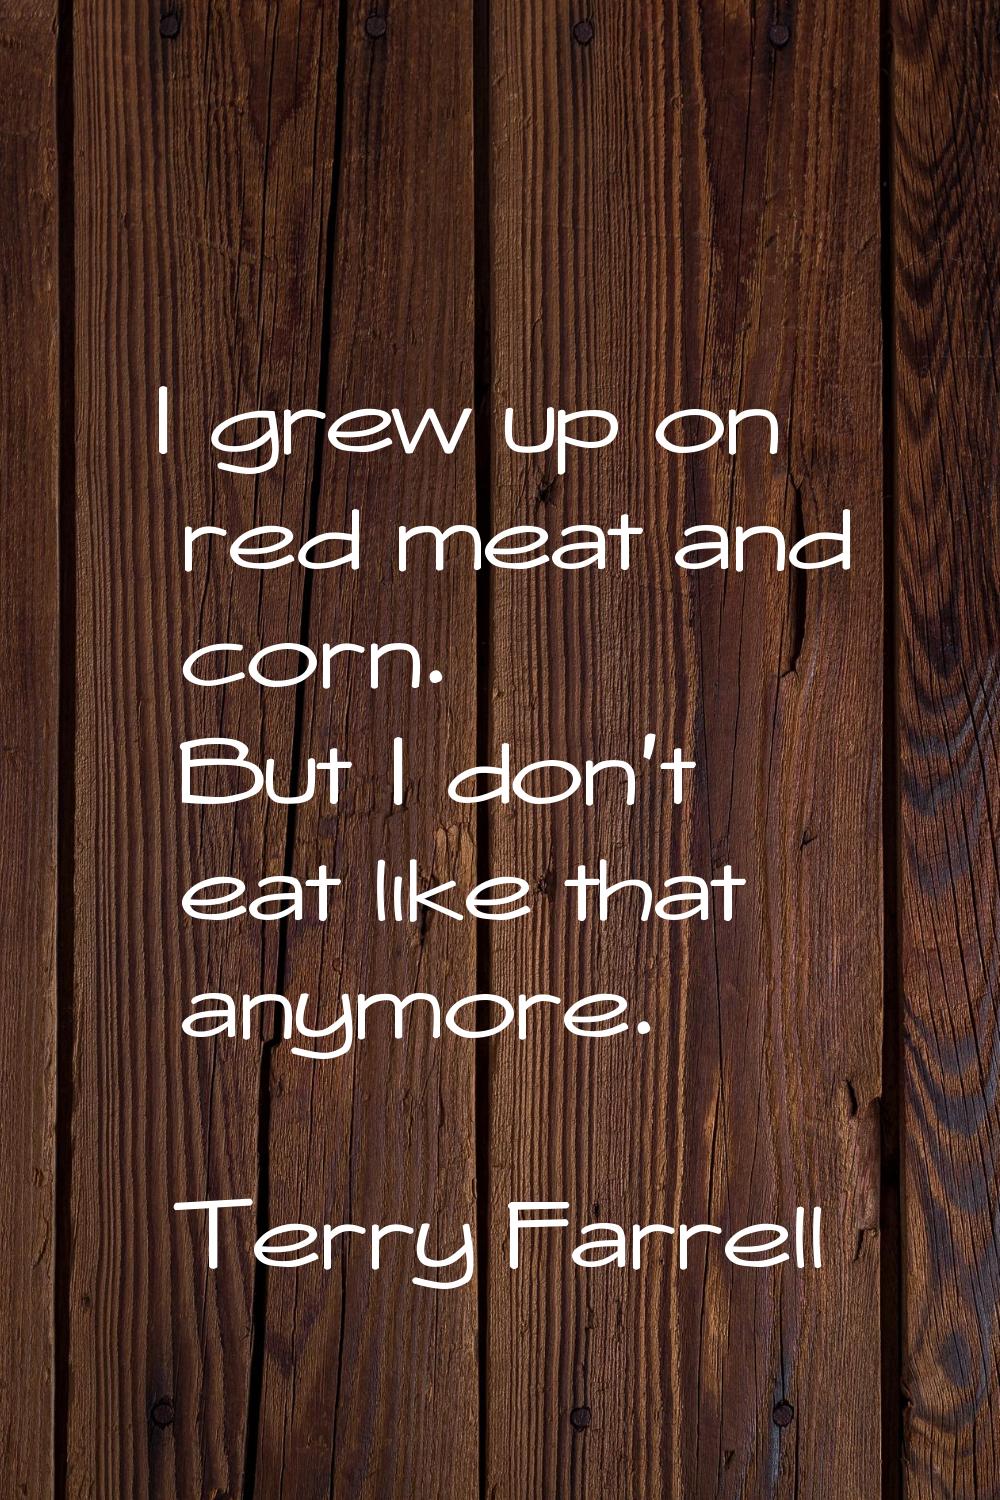 I grew up on red meat and corn. But I don't eat like that anymore.